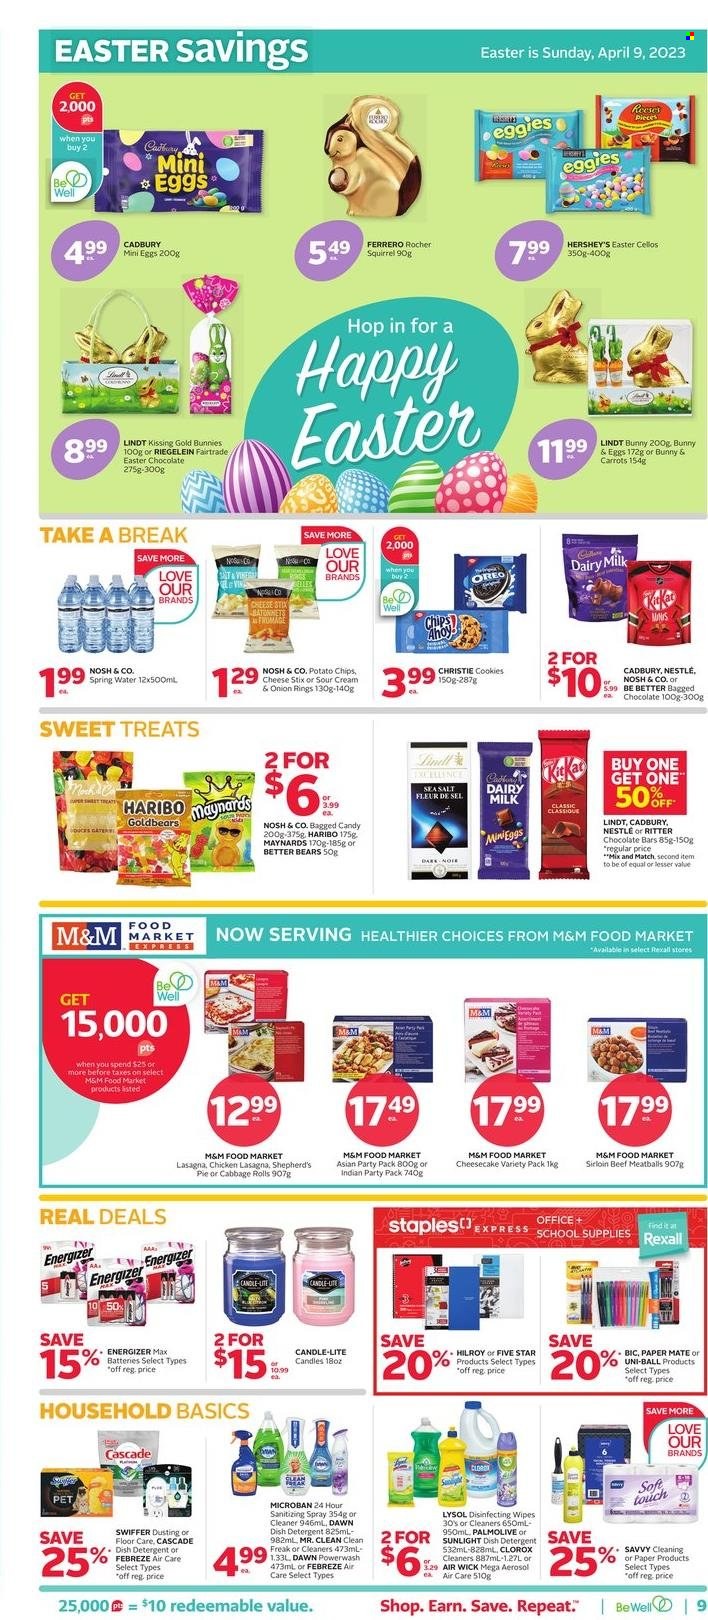 thumbnail - Rexall Flyer - March 24, 2023 - March 30, 2023 - Sales products - pie, onion rings, meatballs, lasagna meal, cookies, Haribo, KitKat, Reese's, Hershey's, Cadbury, Dairy Milk, chocolate egg, chocolate bar, potato chips, chips, cabbage, spring water, water, wipes, Febreze, cleaner, Lysol, Clorox, Swiffer, Sunlight, Cascade, dishwasher cleaner, Palmolive, BIC, Paper Mate, candle, Air Wick, battery, detergent, Energizer, Nestlé, Oreo, Lindt, Ferrero Rocher, M&M's. Page 10.